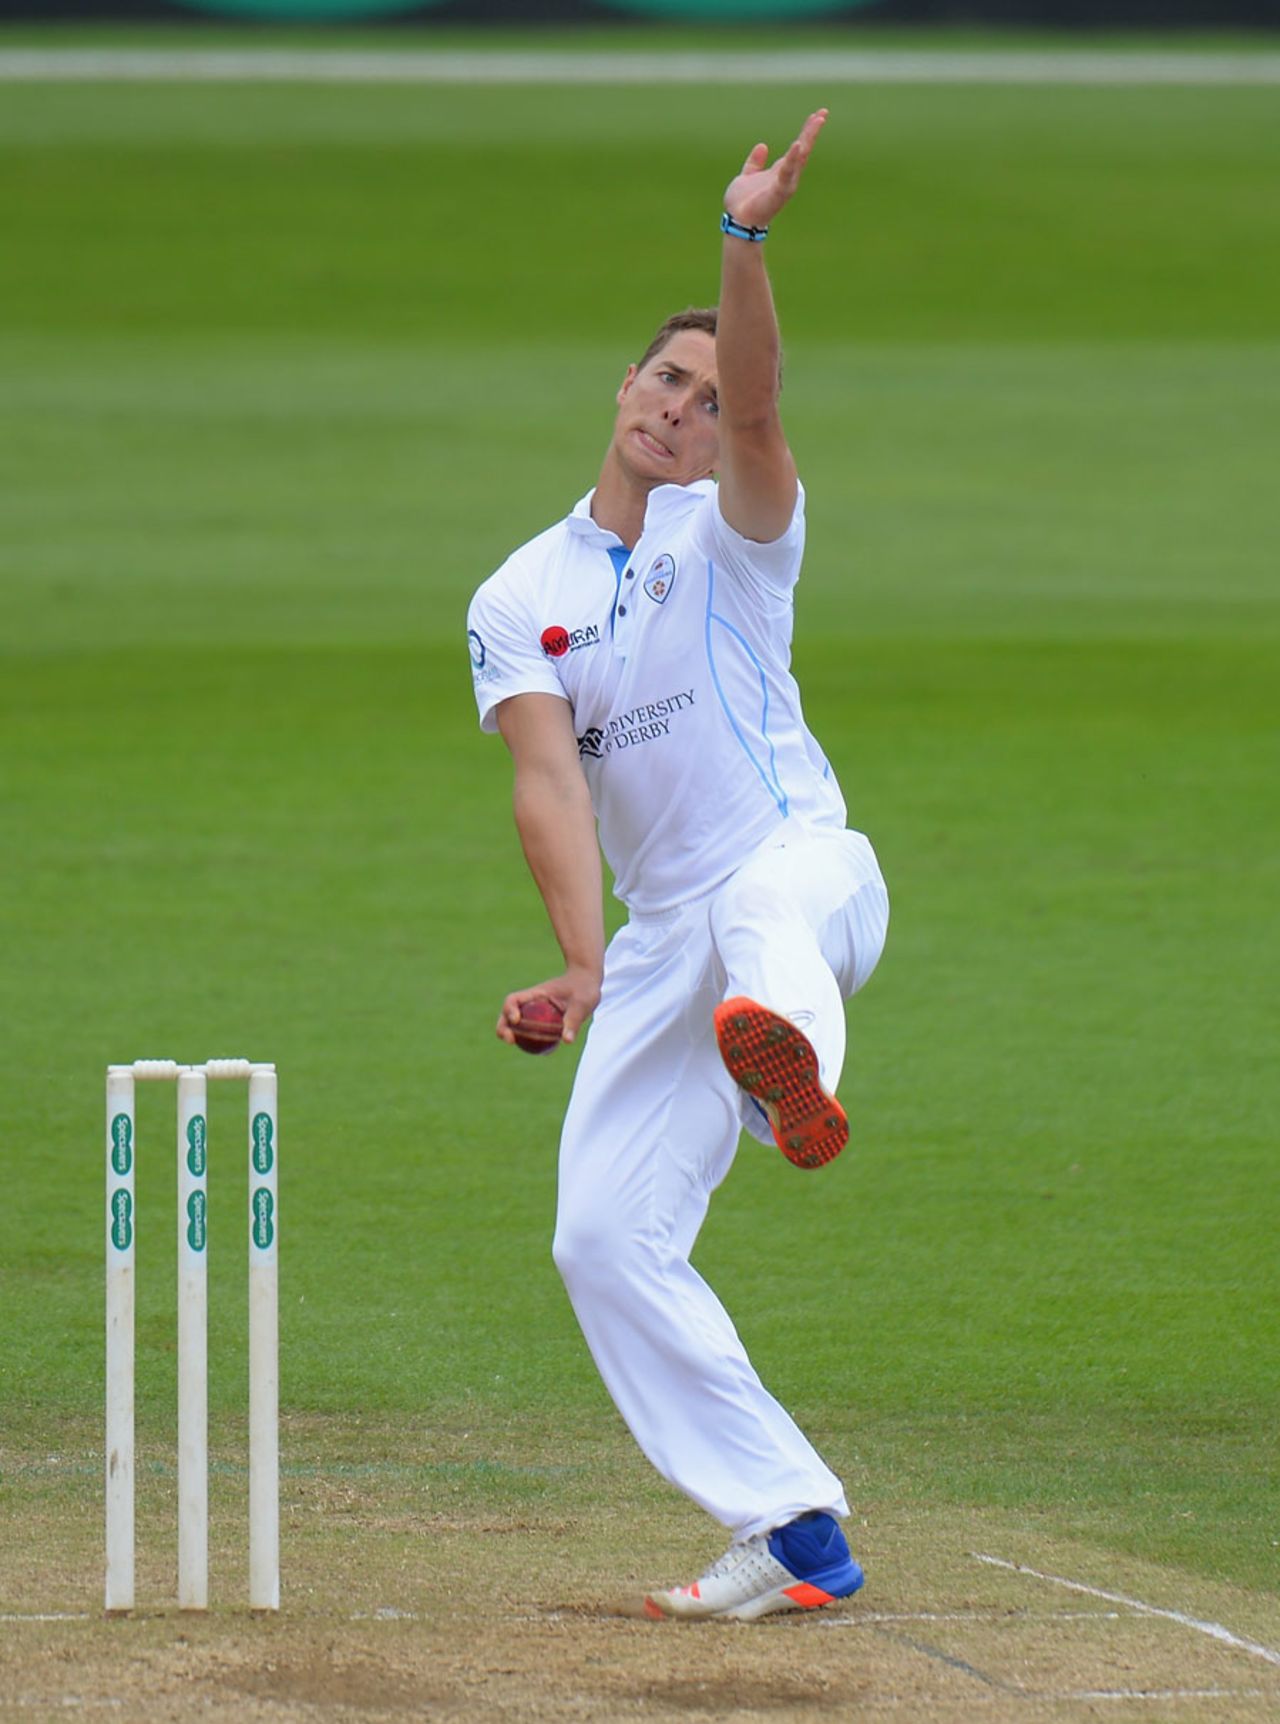 Will Davis was making his Championship debut, Derbyshire v Worcestershire, County Championship, Division Two, Derby, 3rd day, June 22, 2016